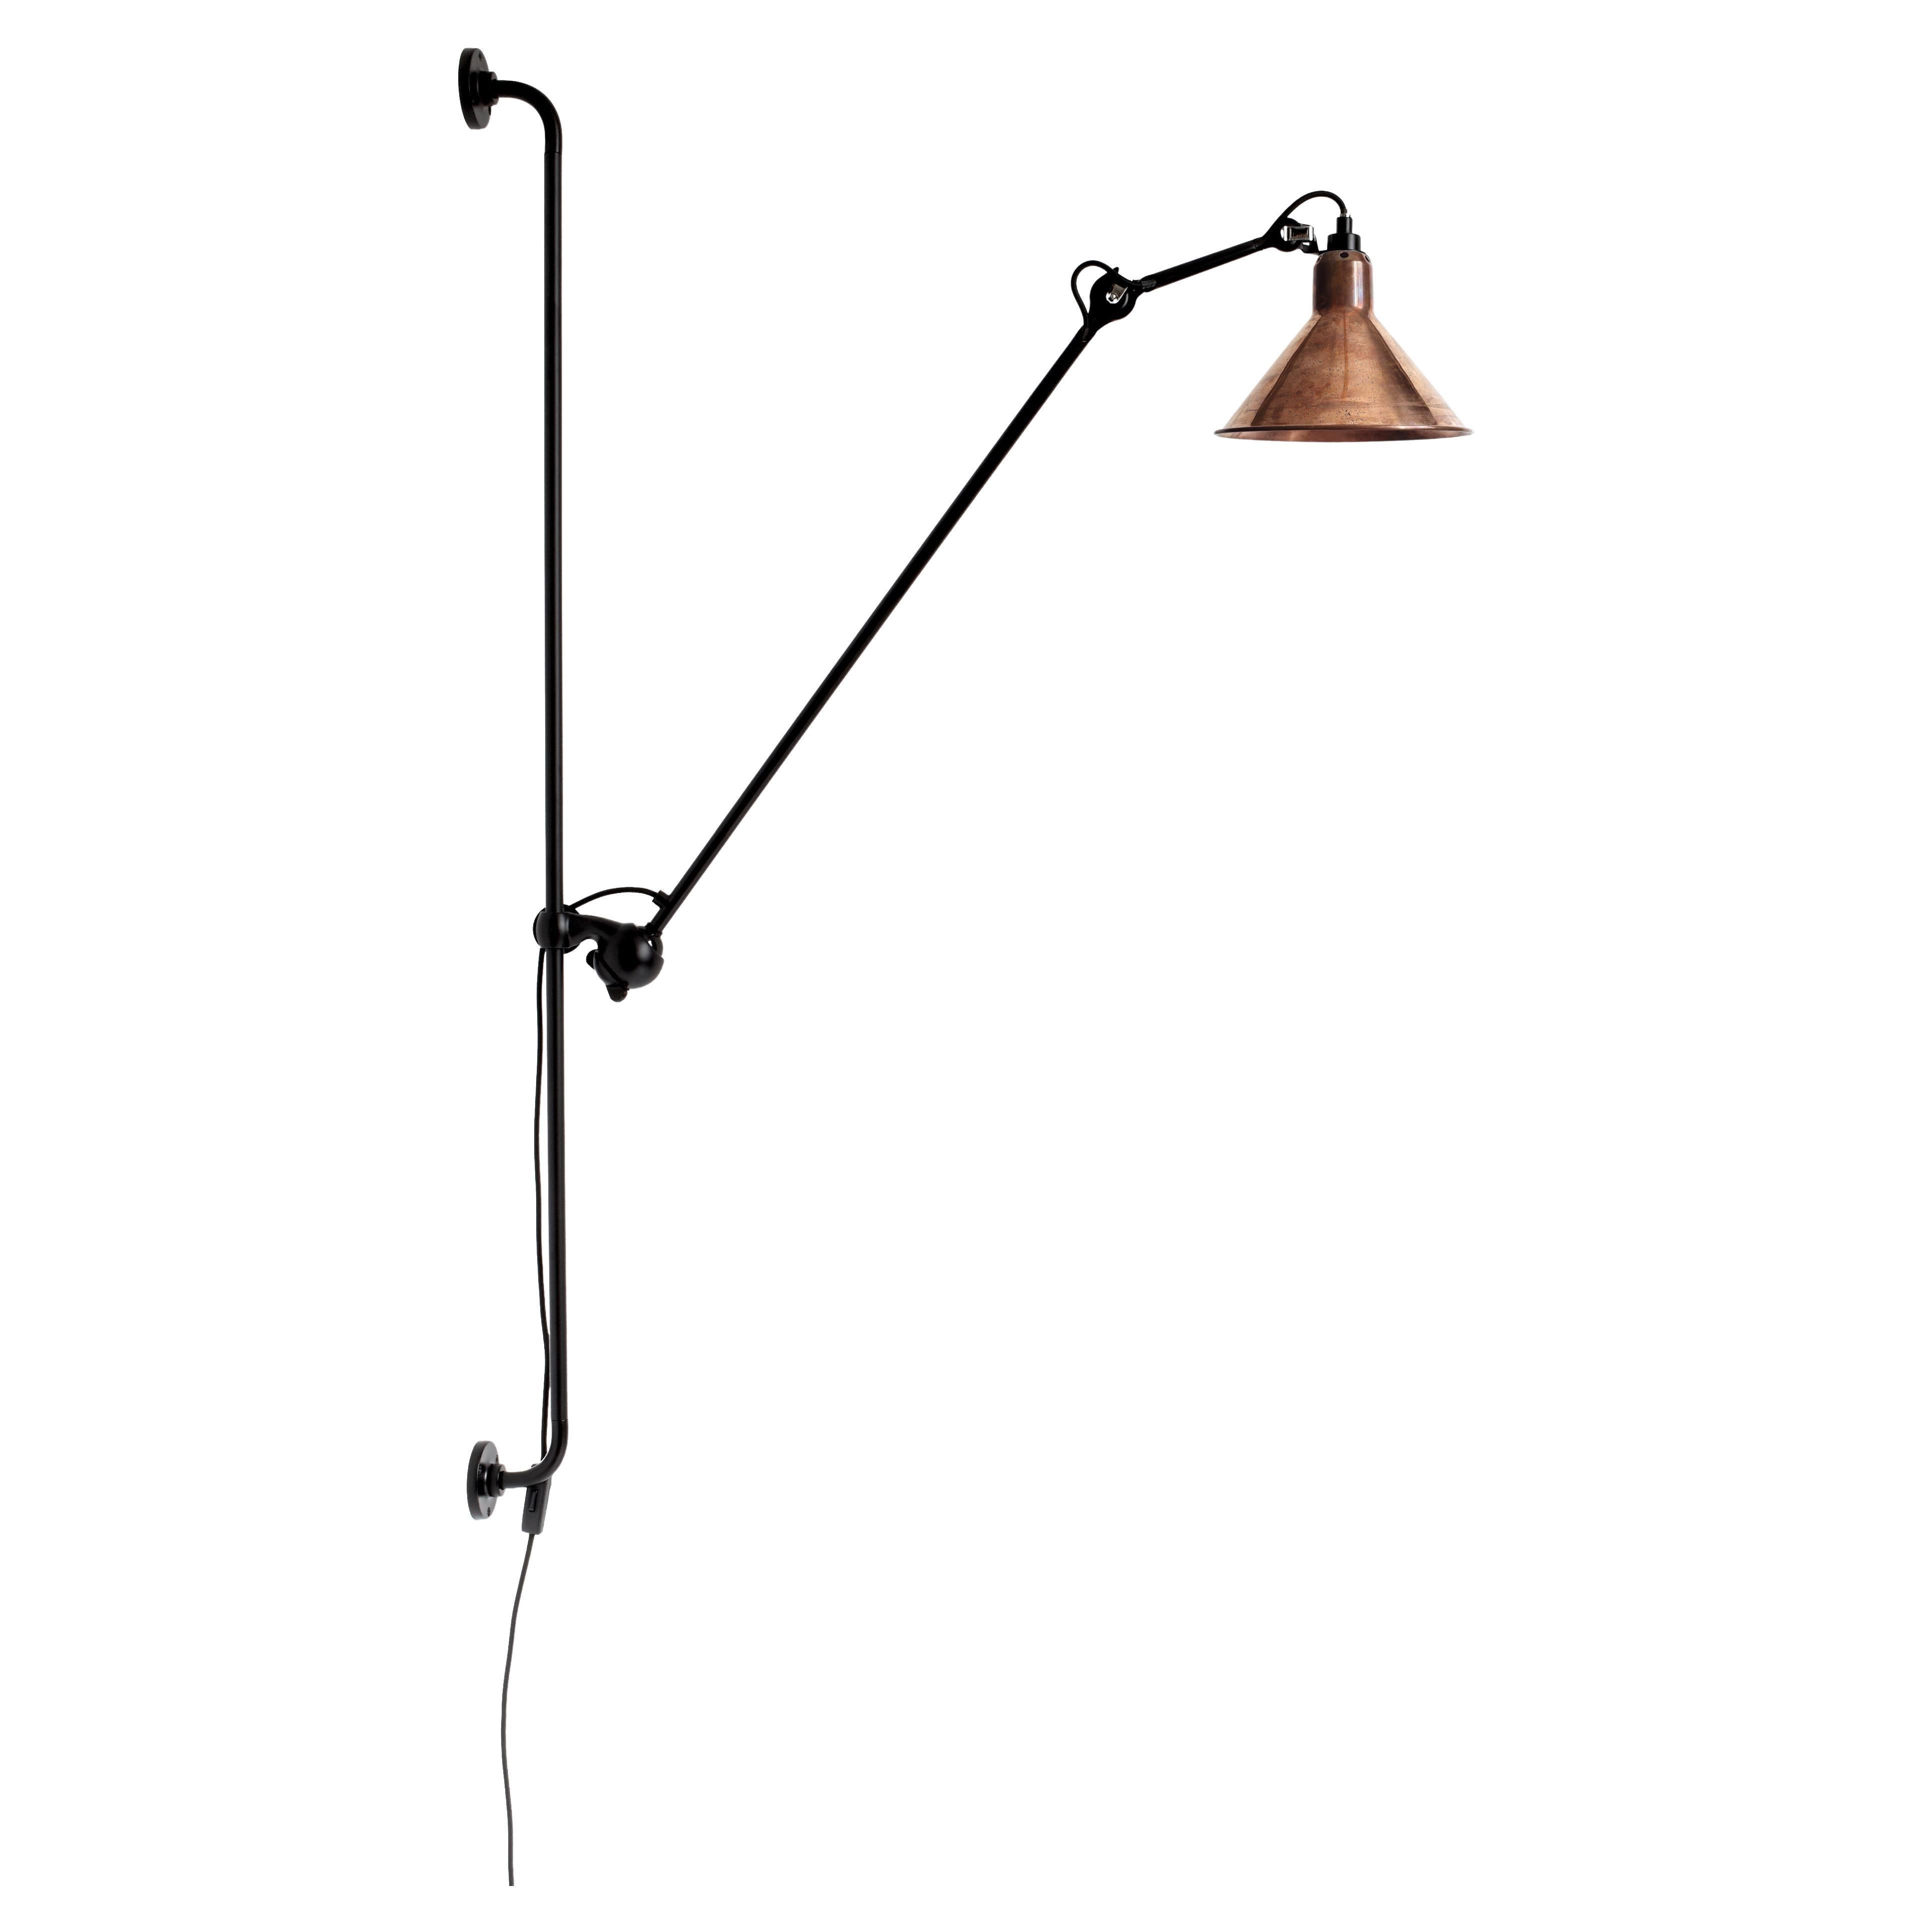 DCW Editions La Lampe Gras N°214 Conic Wall Lamp in Black Arm & Raw Copper Shade For Sale